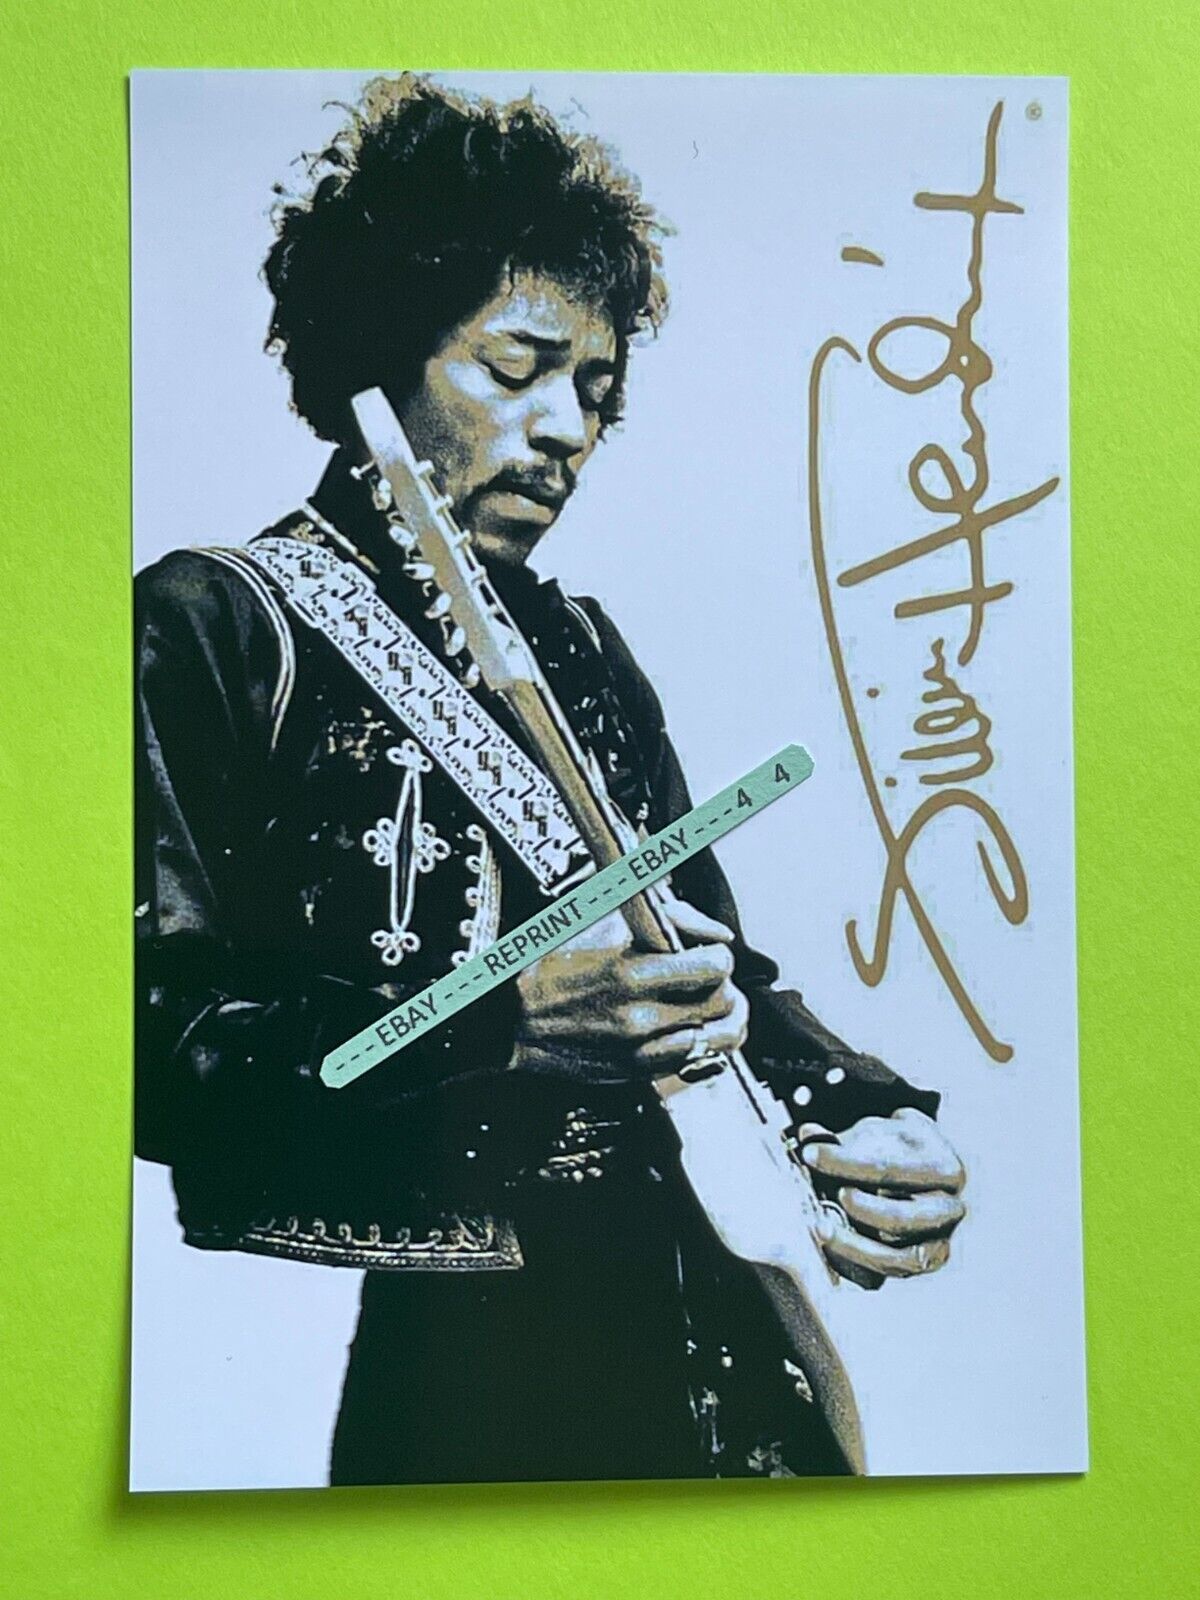 Found PHOTO of The JIMI HENDRIX Experience Old Guitar Legend from the 60\'s